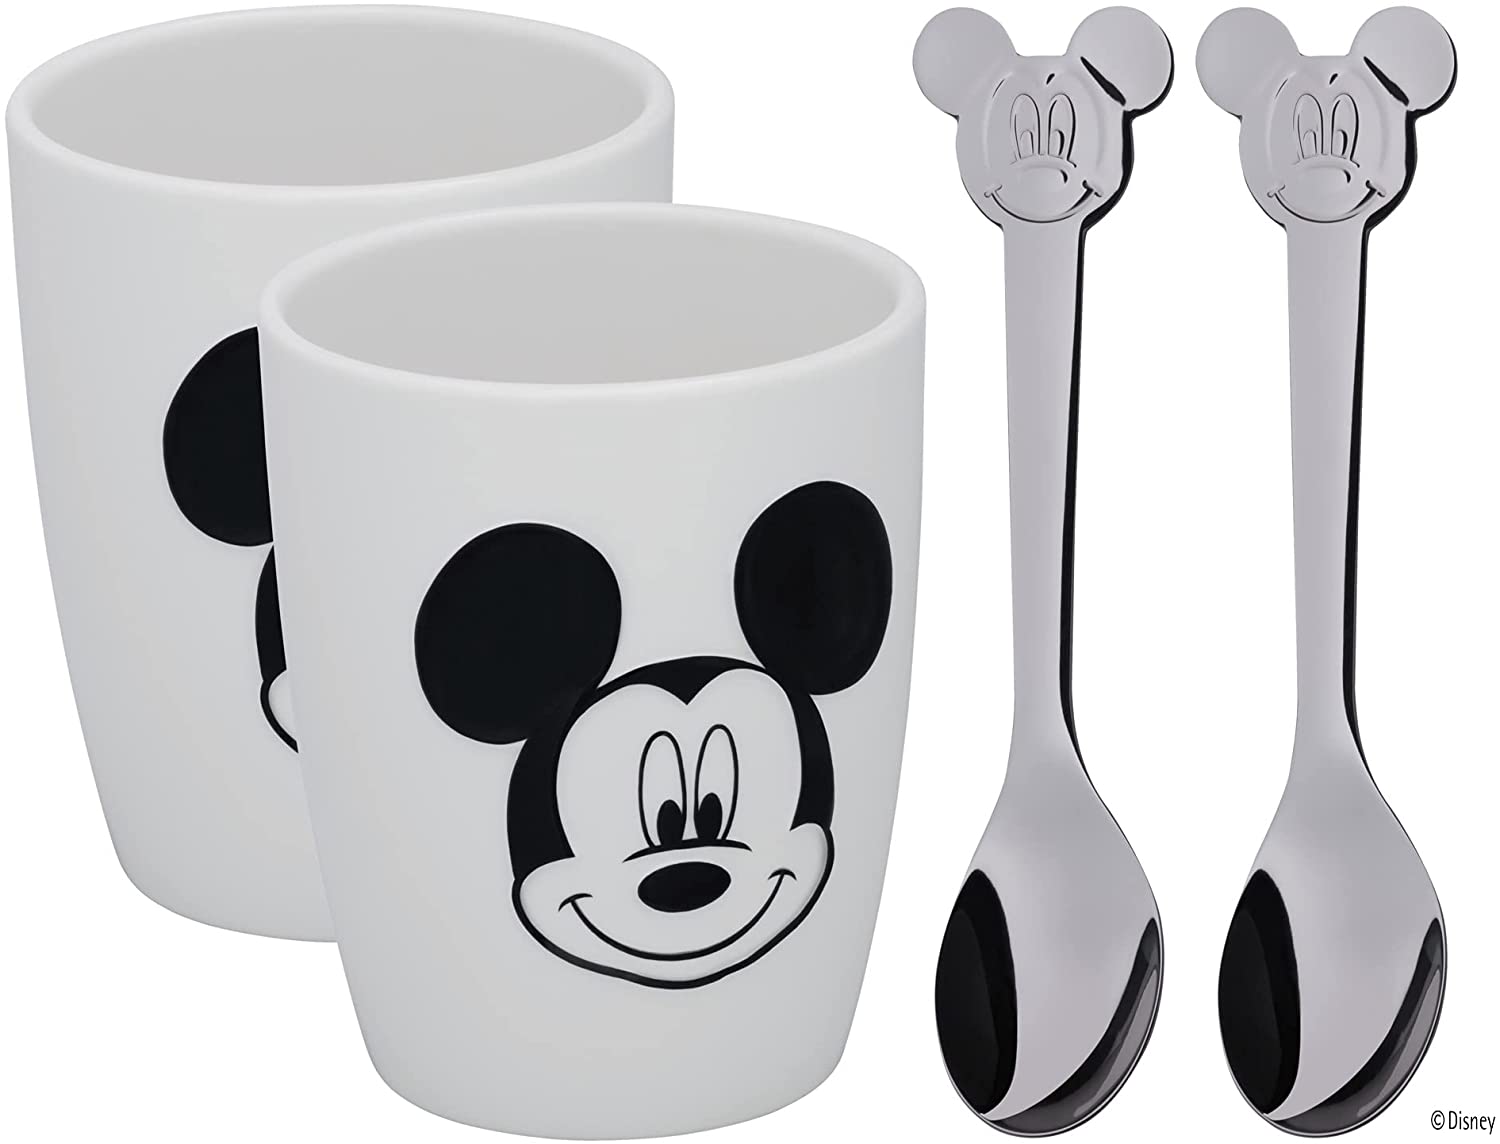 WMF Disney Mickey Mouse Mugs Set M, 2 Cups with Spoons, Porcelain, Polished Cromargan Stainless Steel, Dishwasher Safe